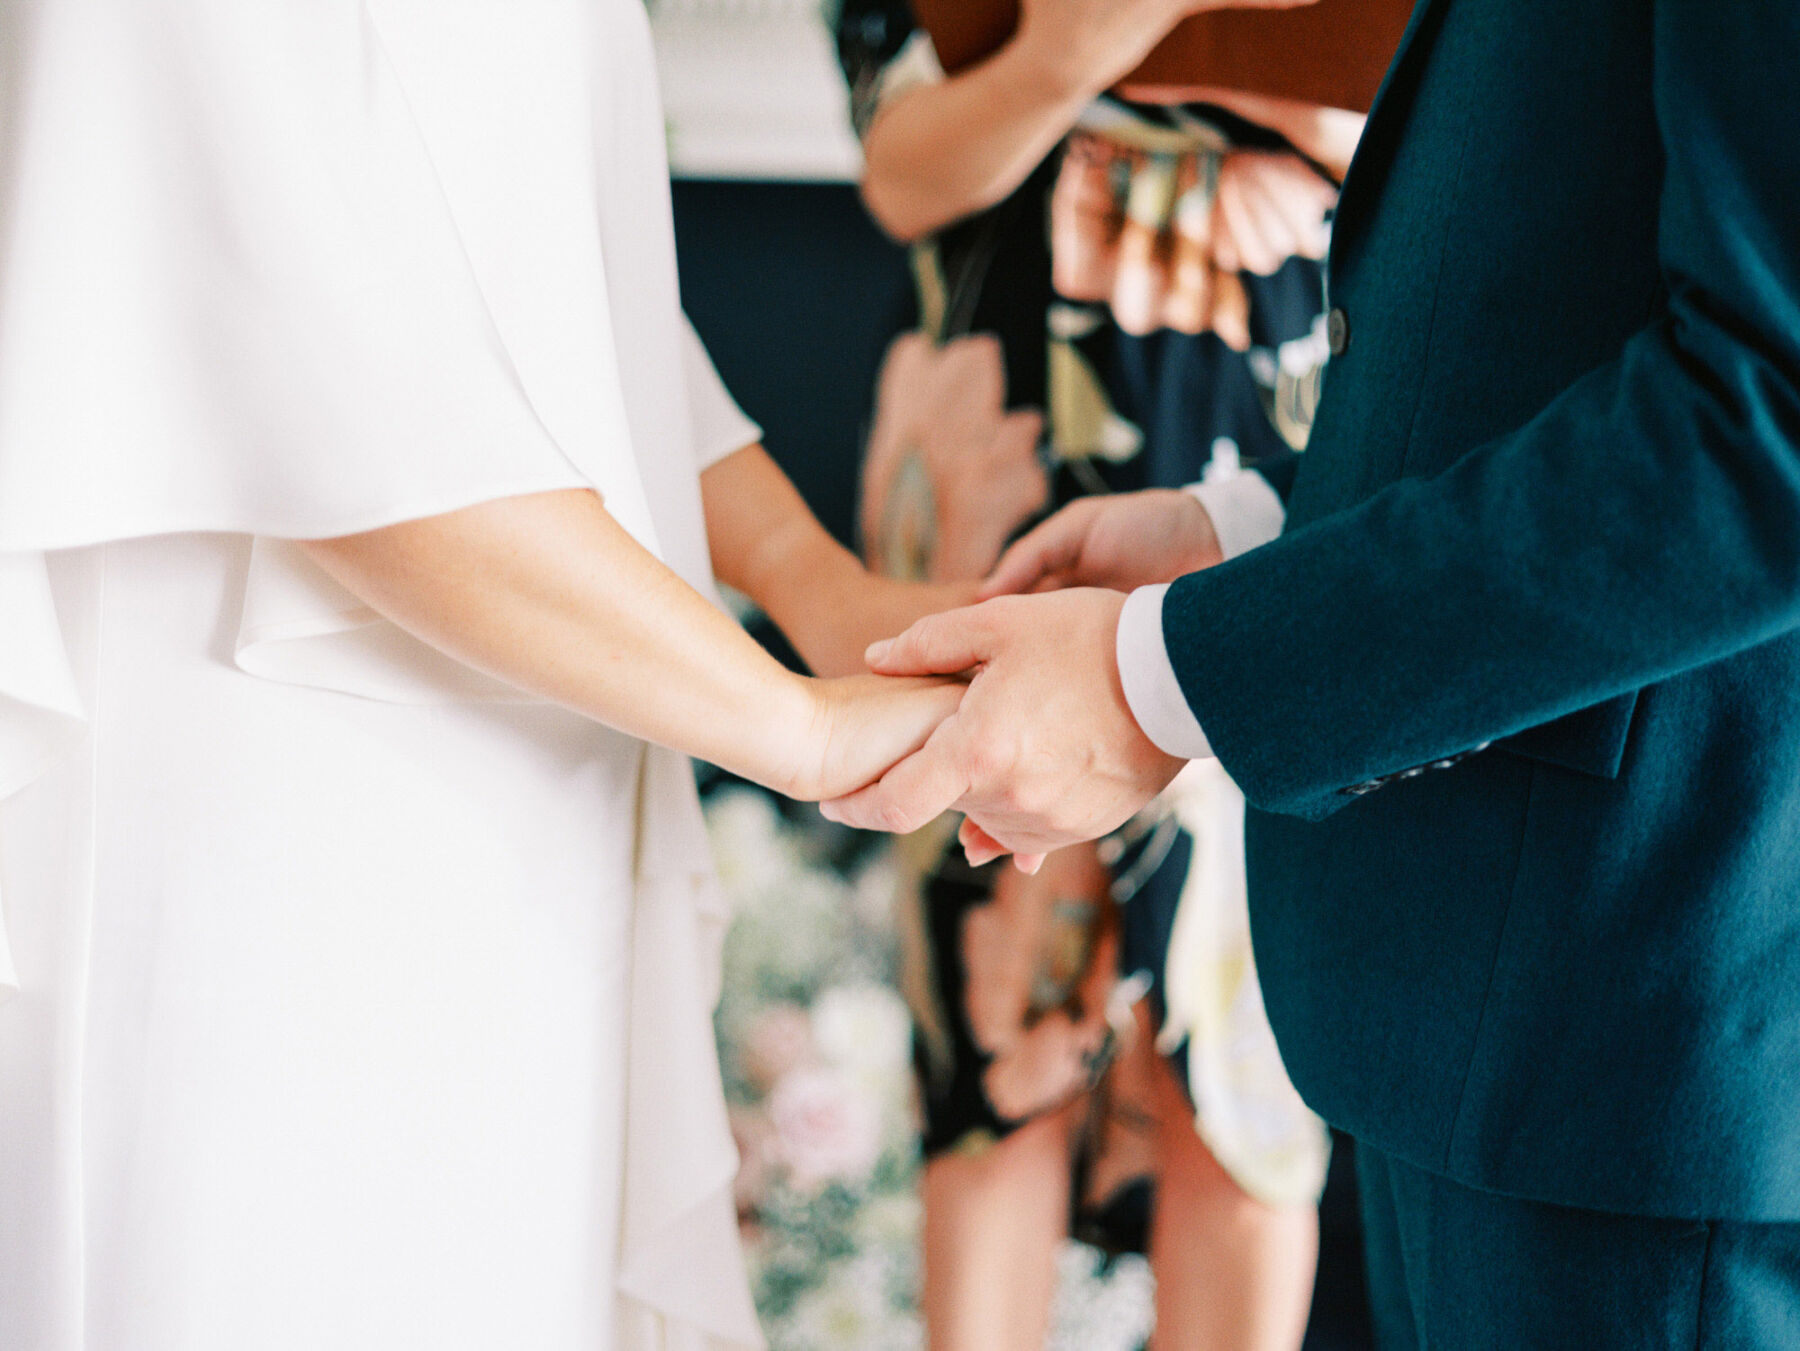 Bride & groom holding hands during ceremony